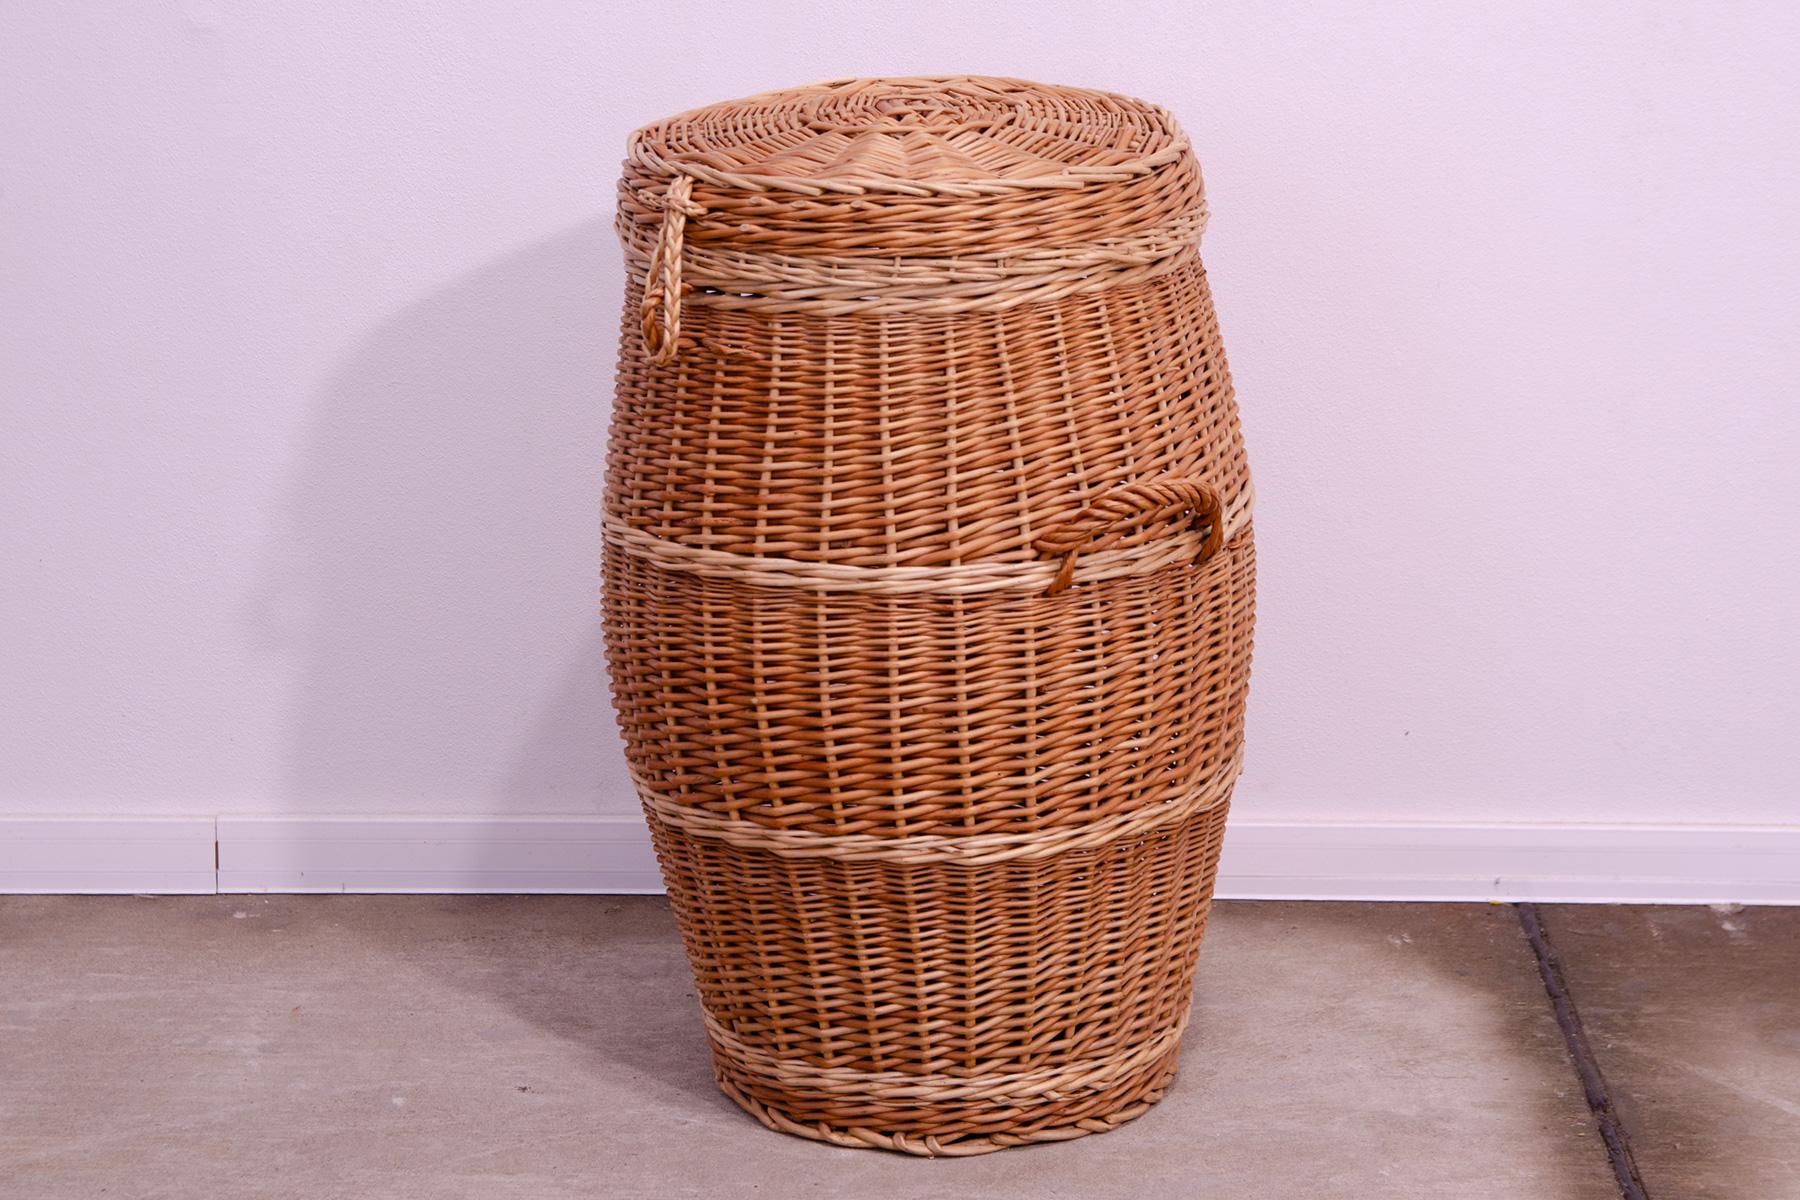 Vintage wicker laundry basket, made in the 70s in the former Czechoslovakia. In very good preserved condition.

Dimensions:

70 x 54 x 44cm (HxWxD)